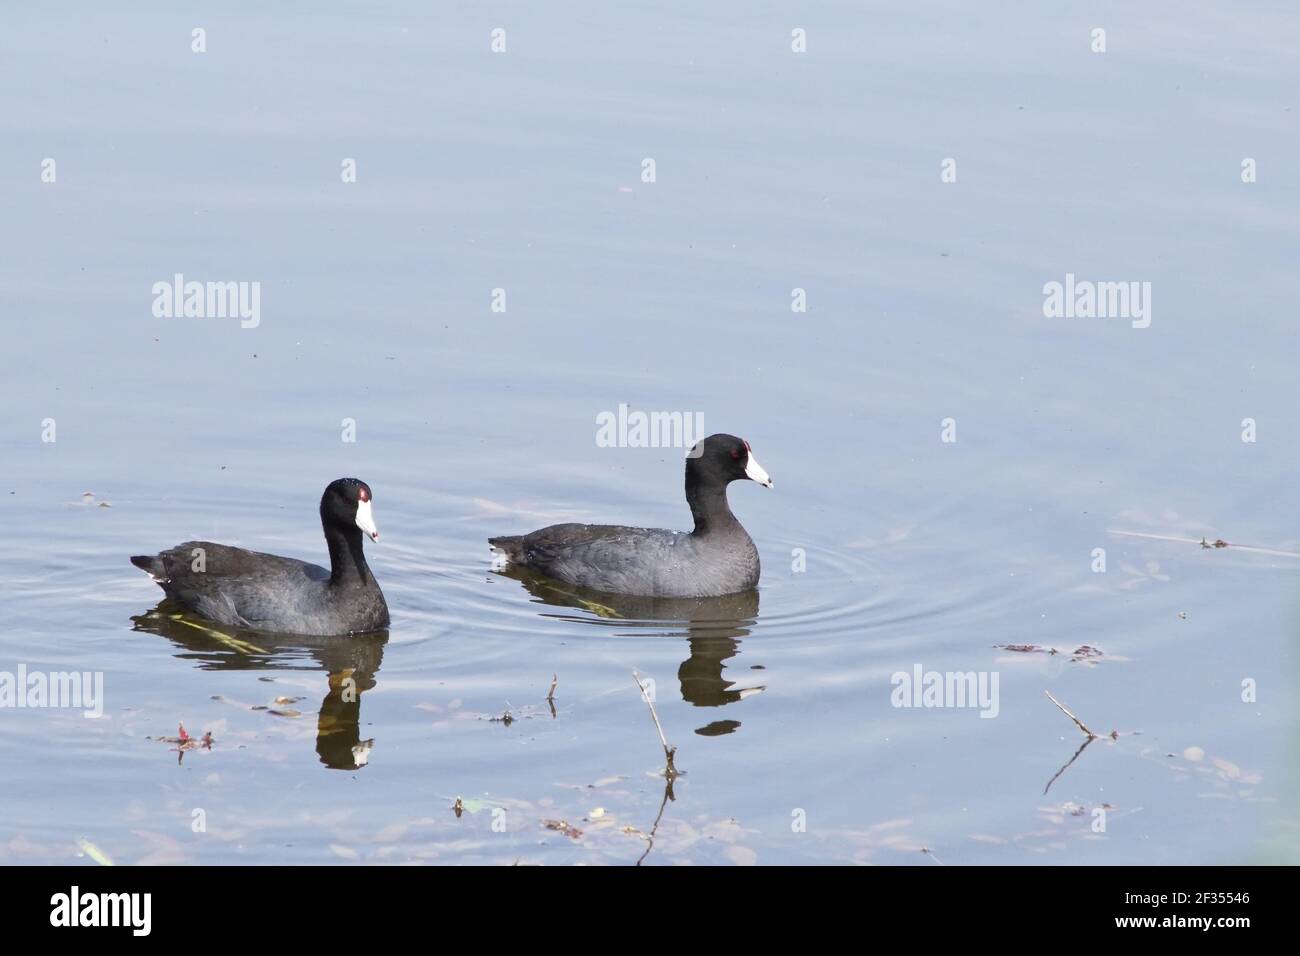 Couple of American Coots swimming peacefully together on a rippling pond Stock Photo